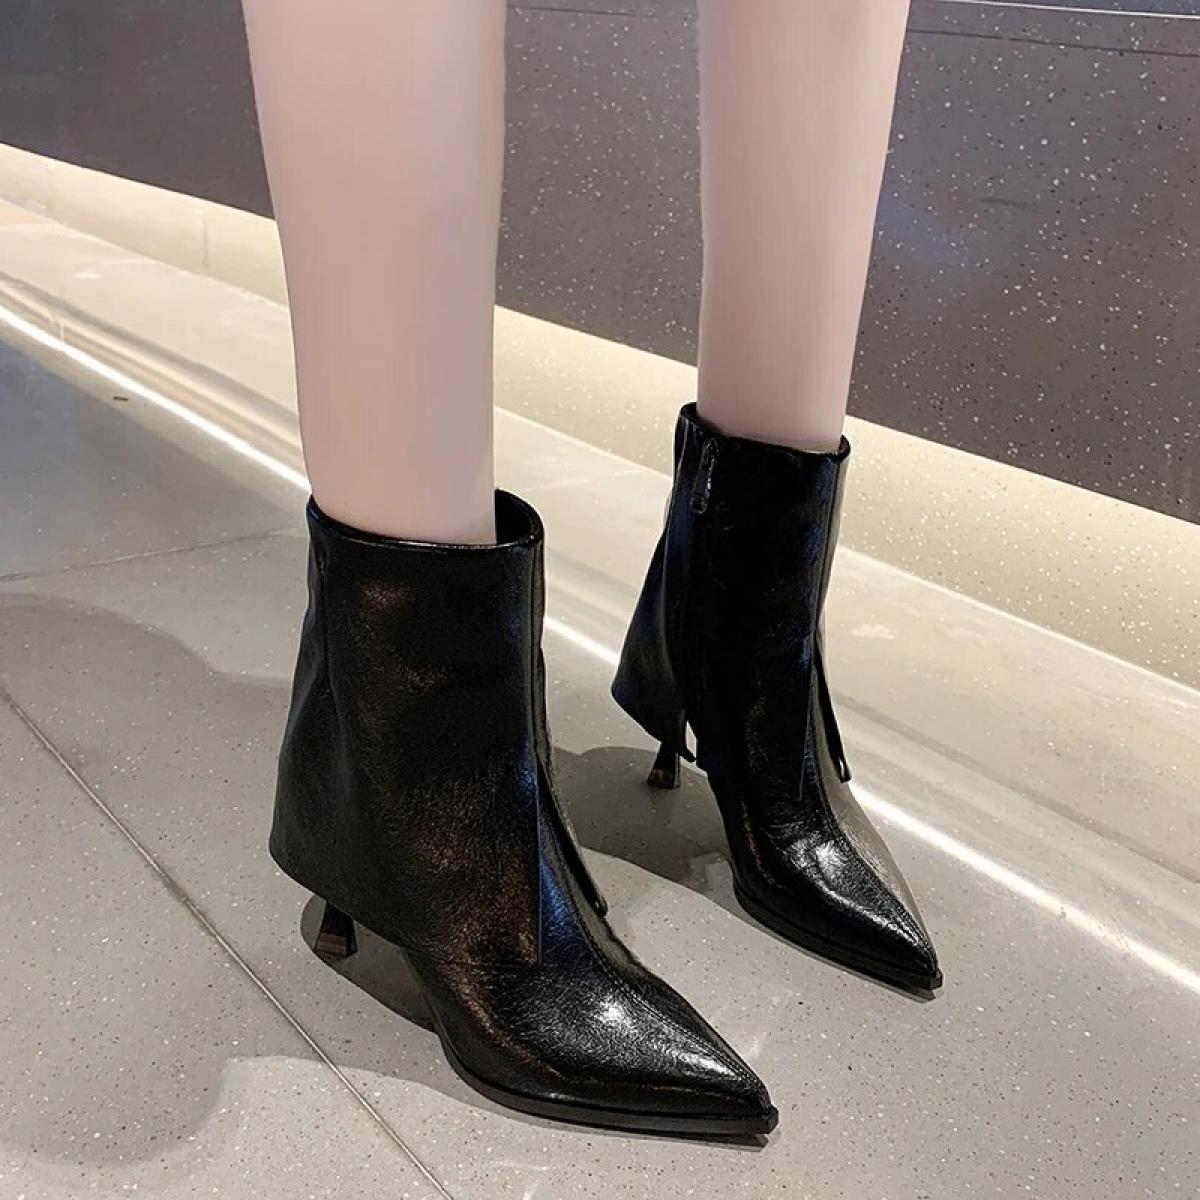  New Pointed Toe Mid Calf Boots Women Autumn Winter Fashion Zipper Botas High Heels Mujer Boots Thin Heels Ladies Shoe 3